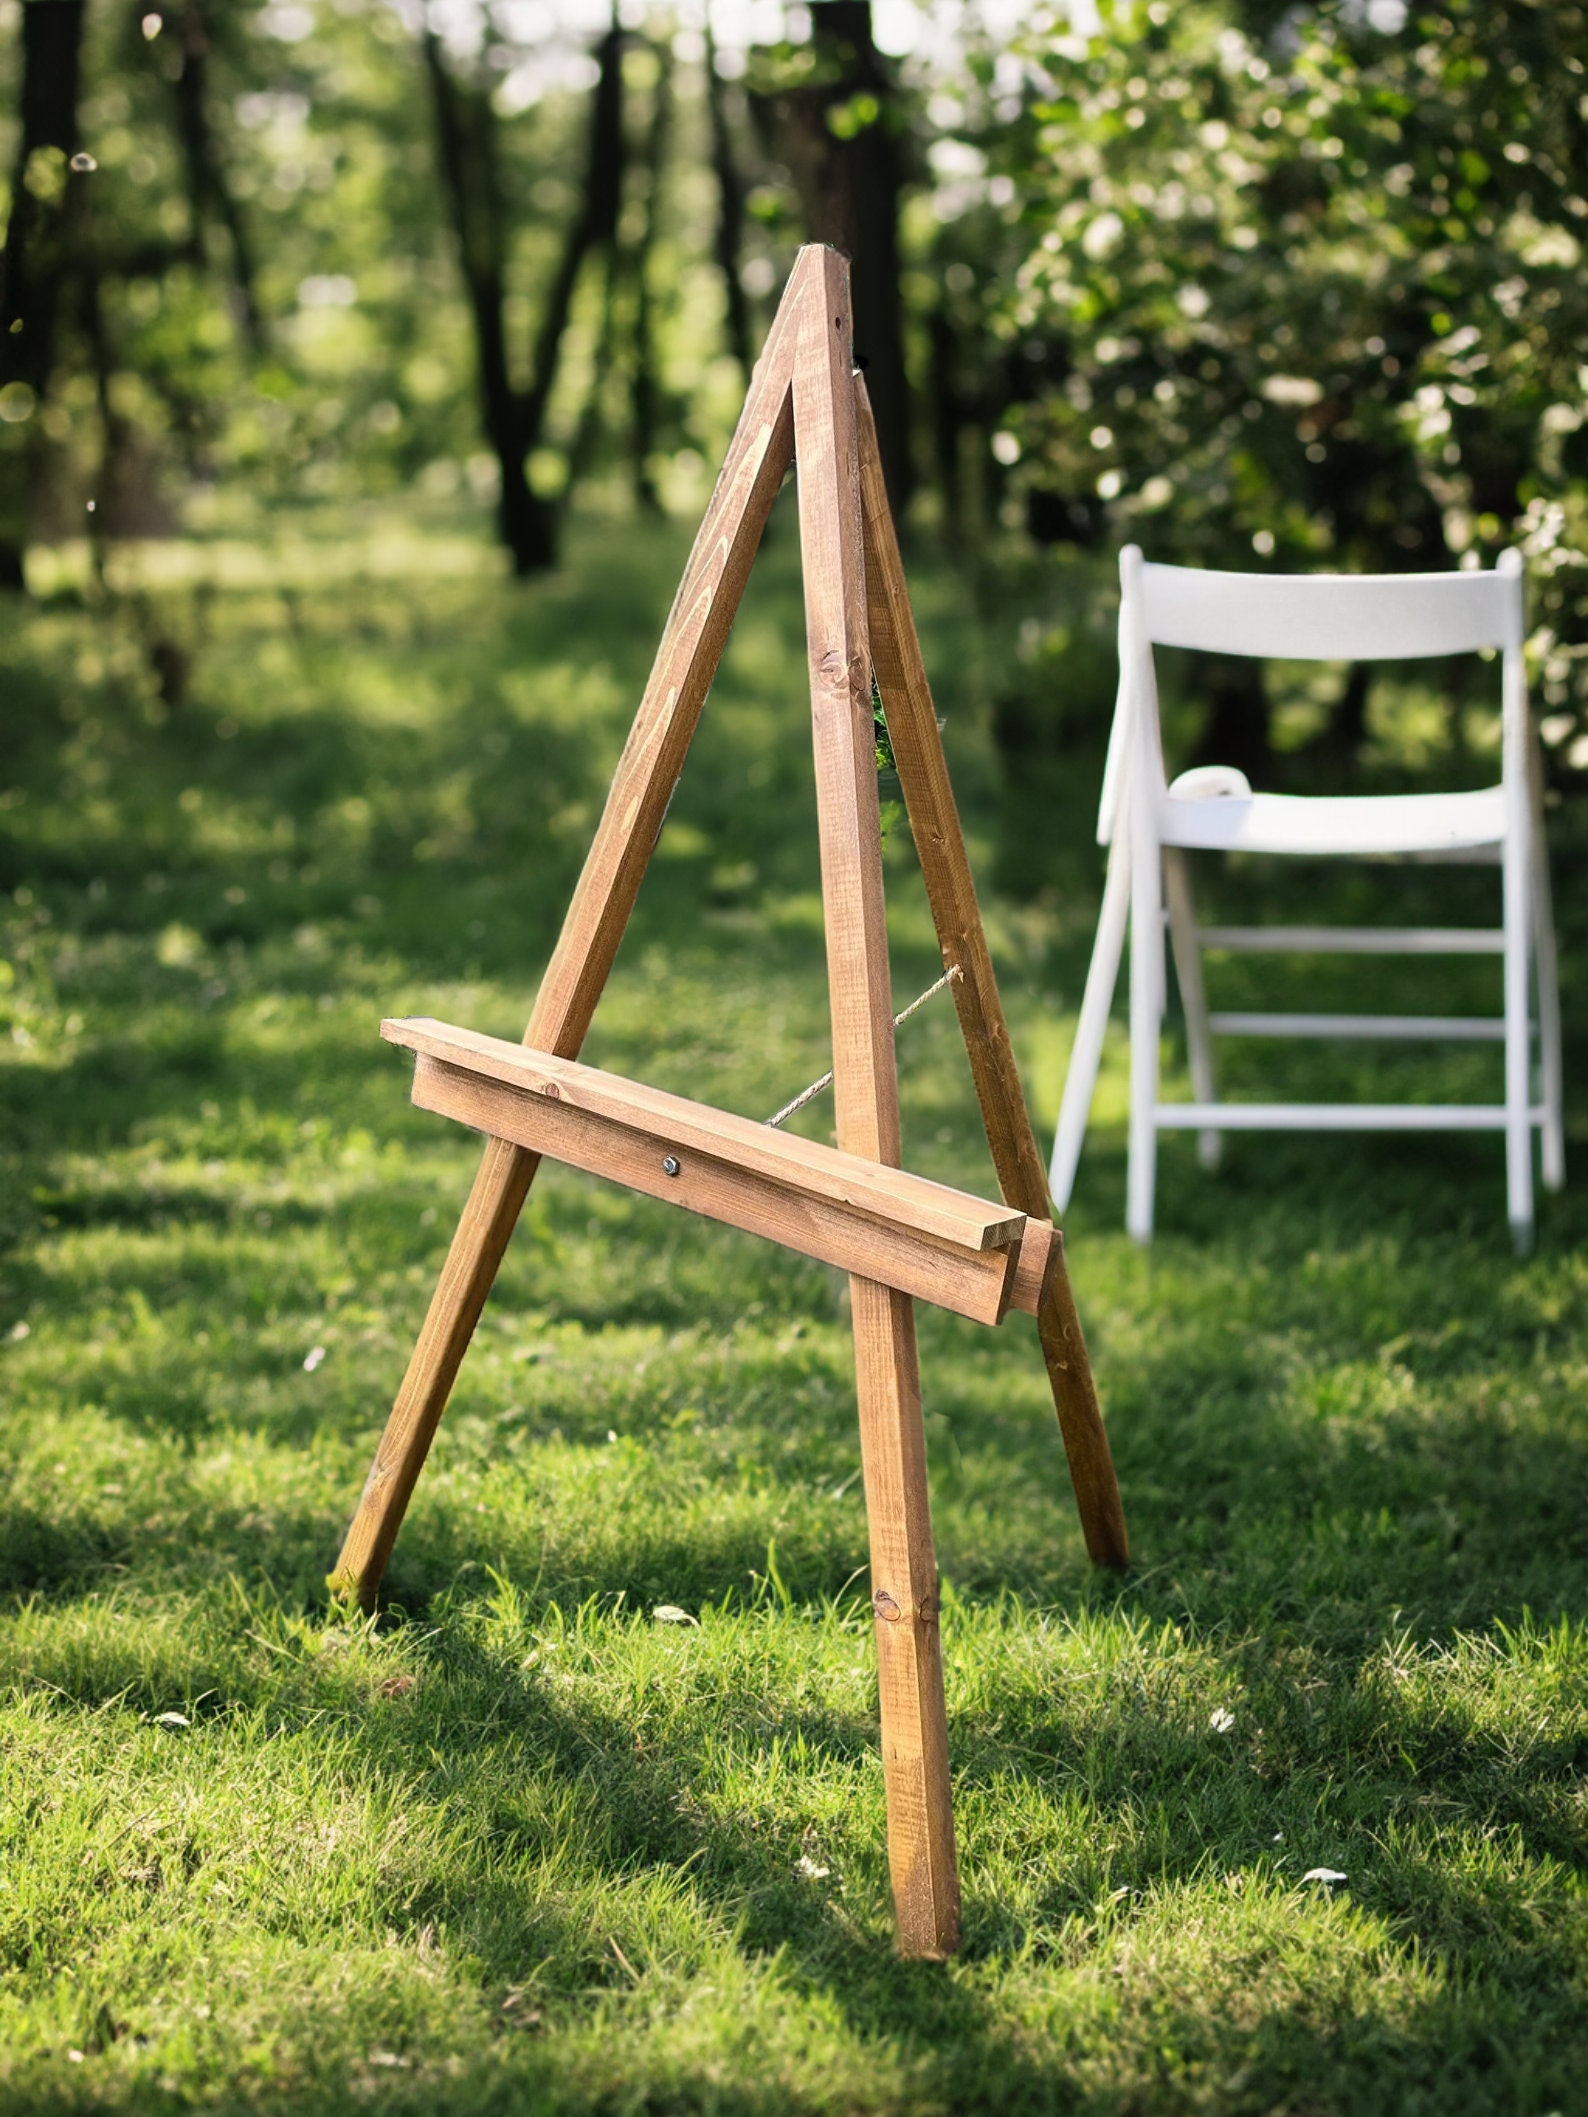 Wedding Welcome Sign Stand, Rustic Wood Display Easel, Portable Large Photo  Easel Guest Book Stand, Standing Floor Easel 2b1wedding Decor 